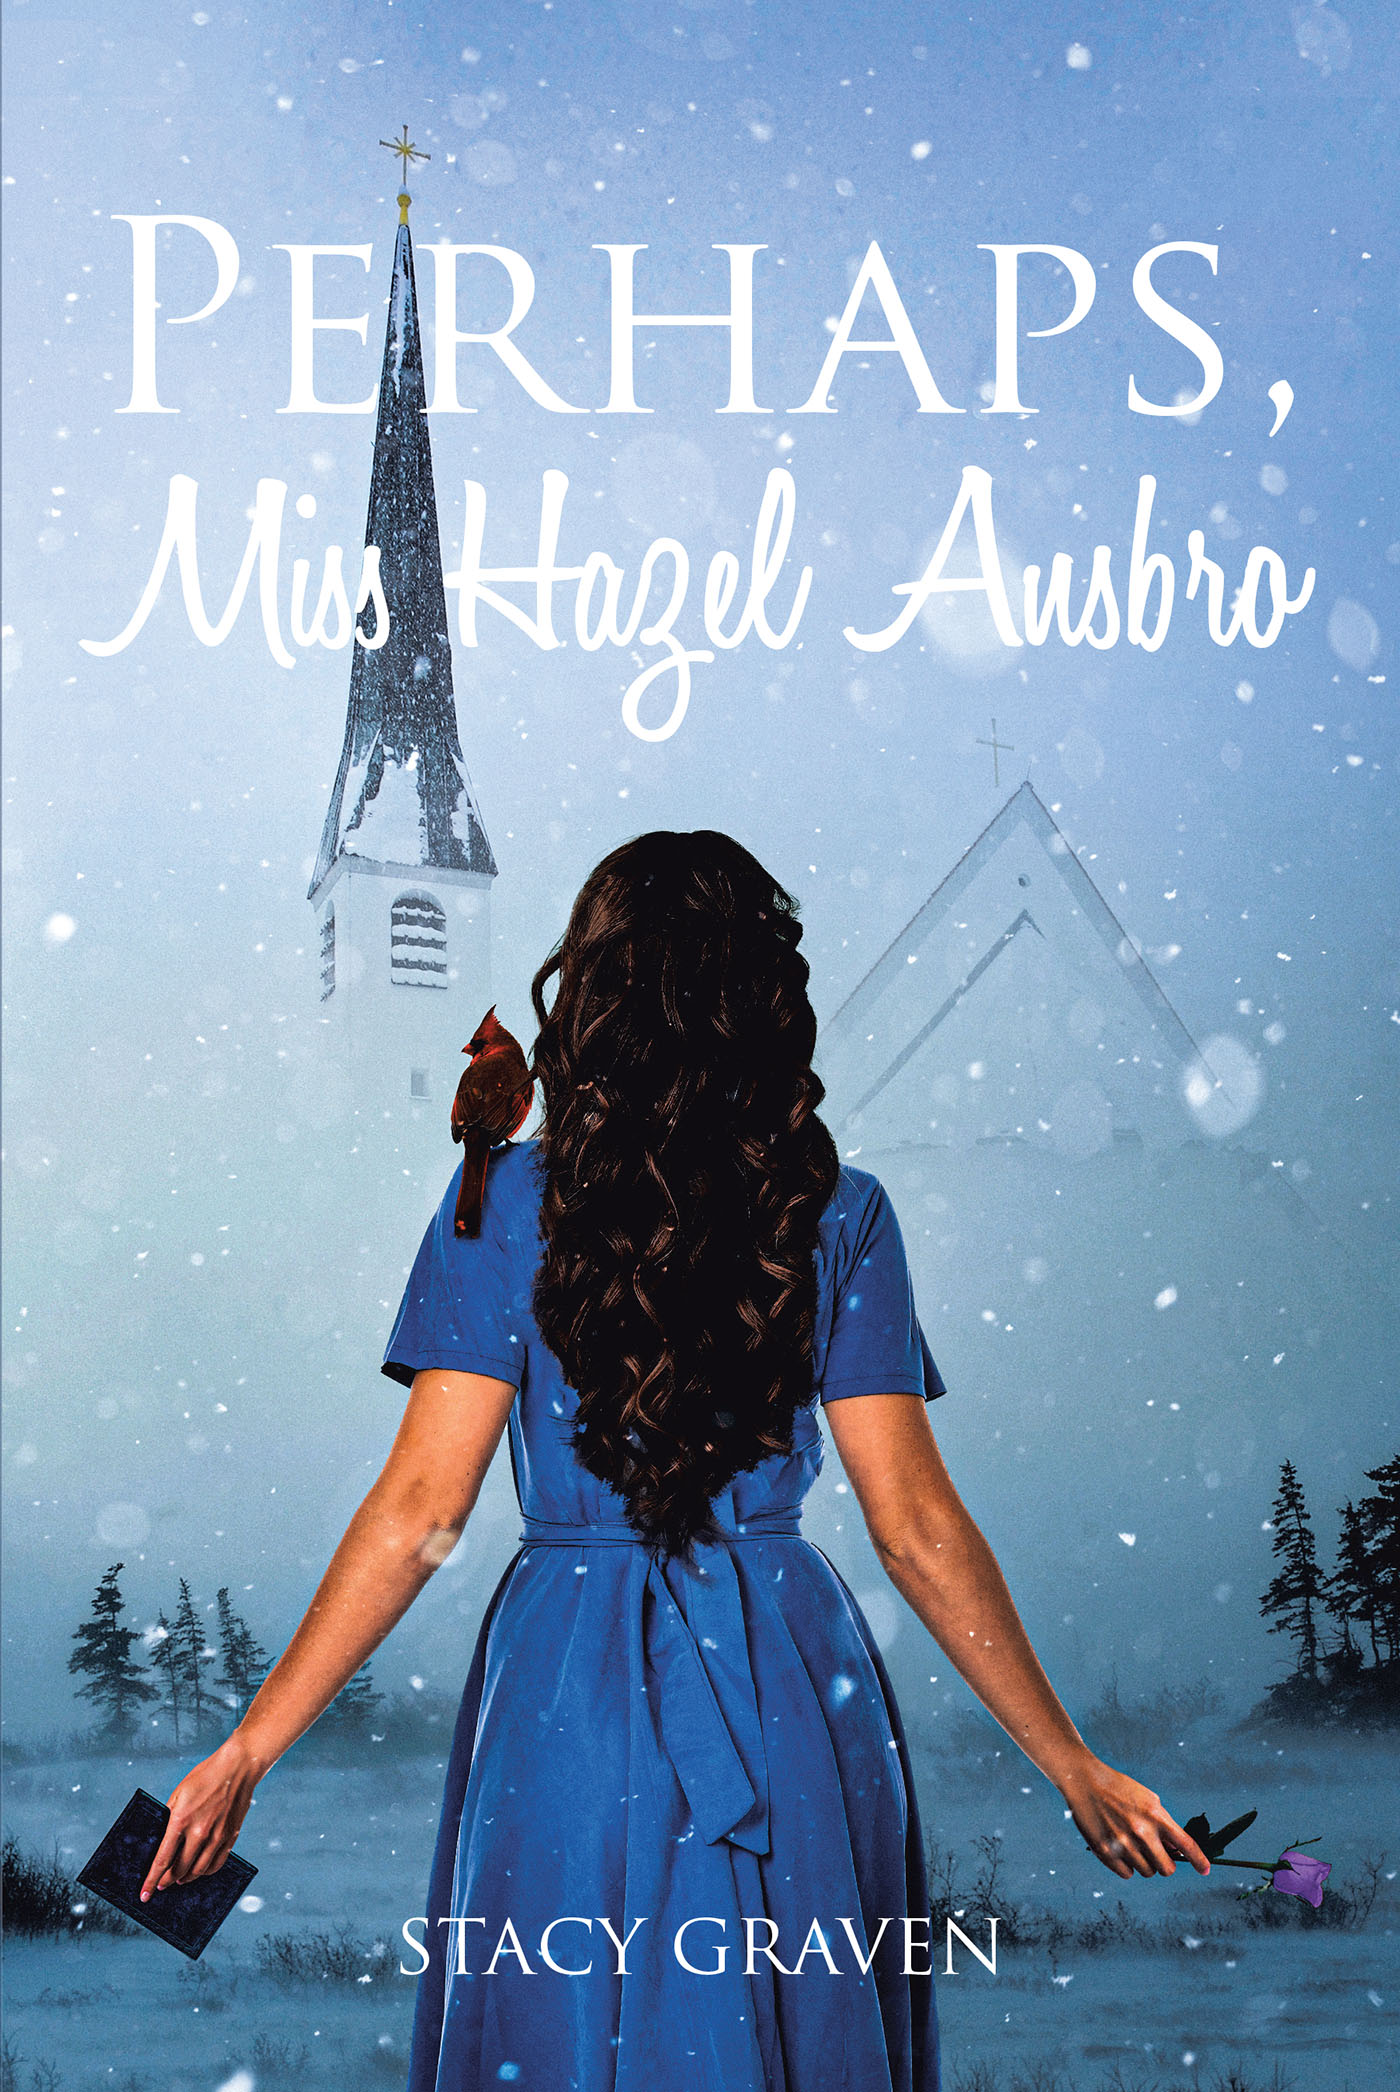 Stacy Graven’s Newly Released "Perhaps, Miss Hazel Ansbro" is an Engaging Historical Fiction That Finds an Unexpected Love and a Feisty Heroine